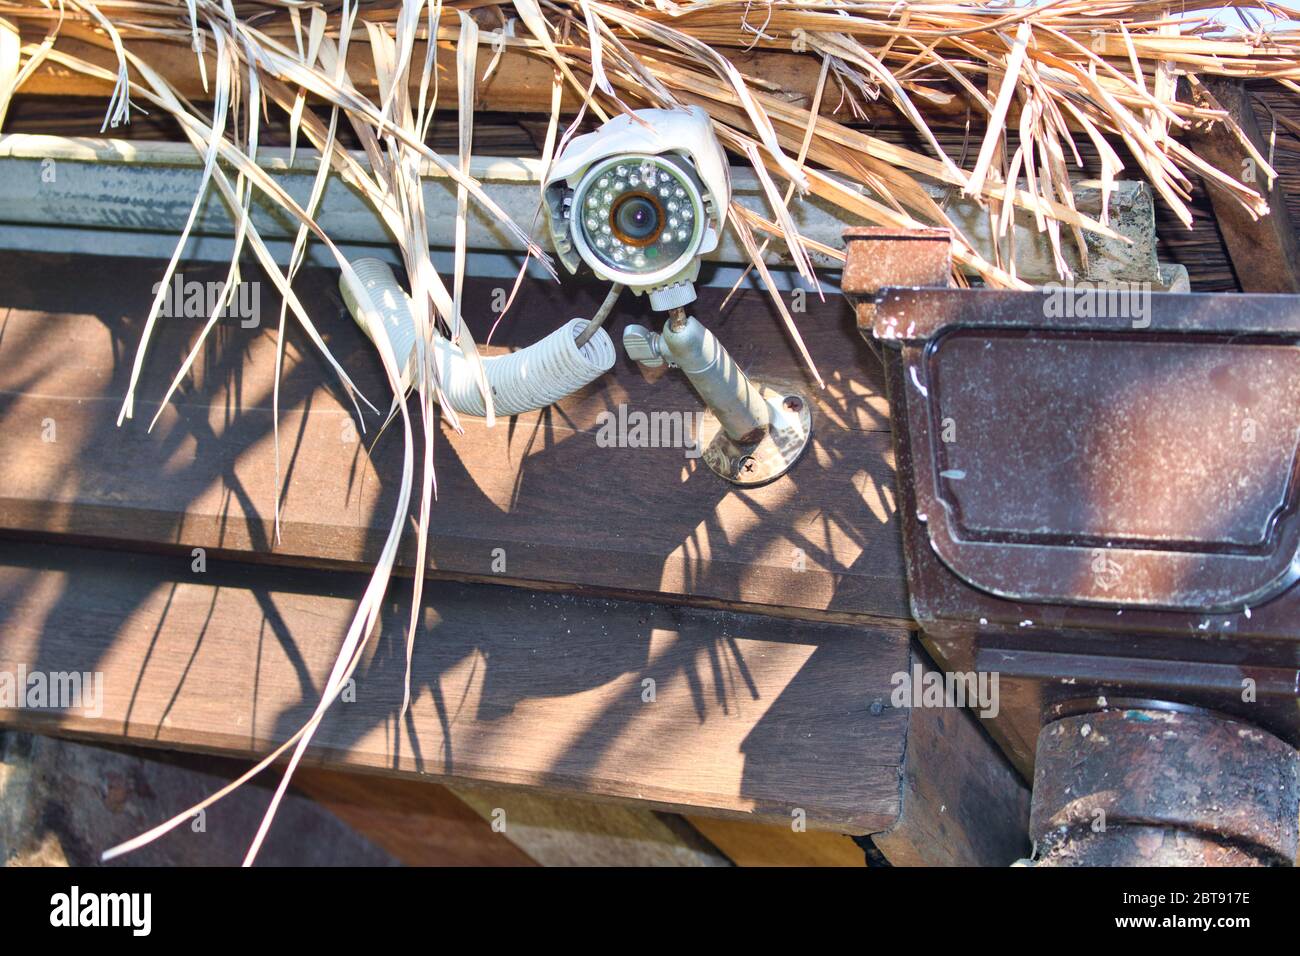 This unique photo shows a hidden camera under a thatched roof to monitor the area and ensure security Stock Photo